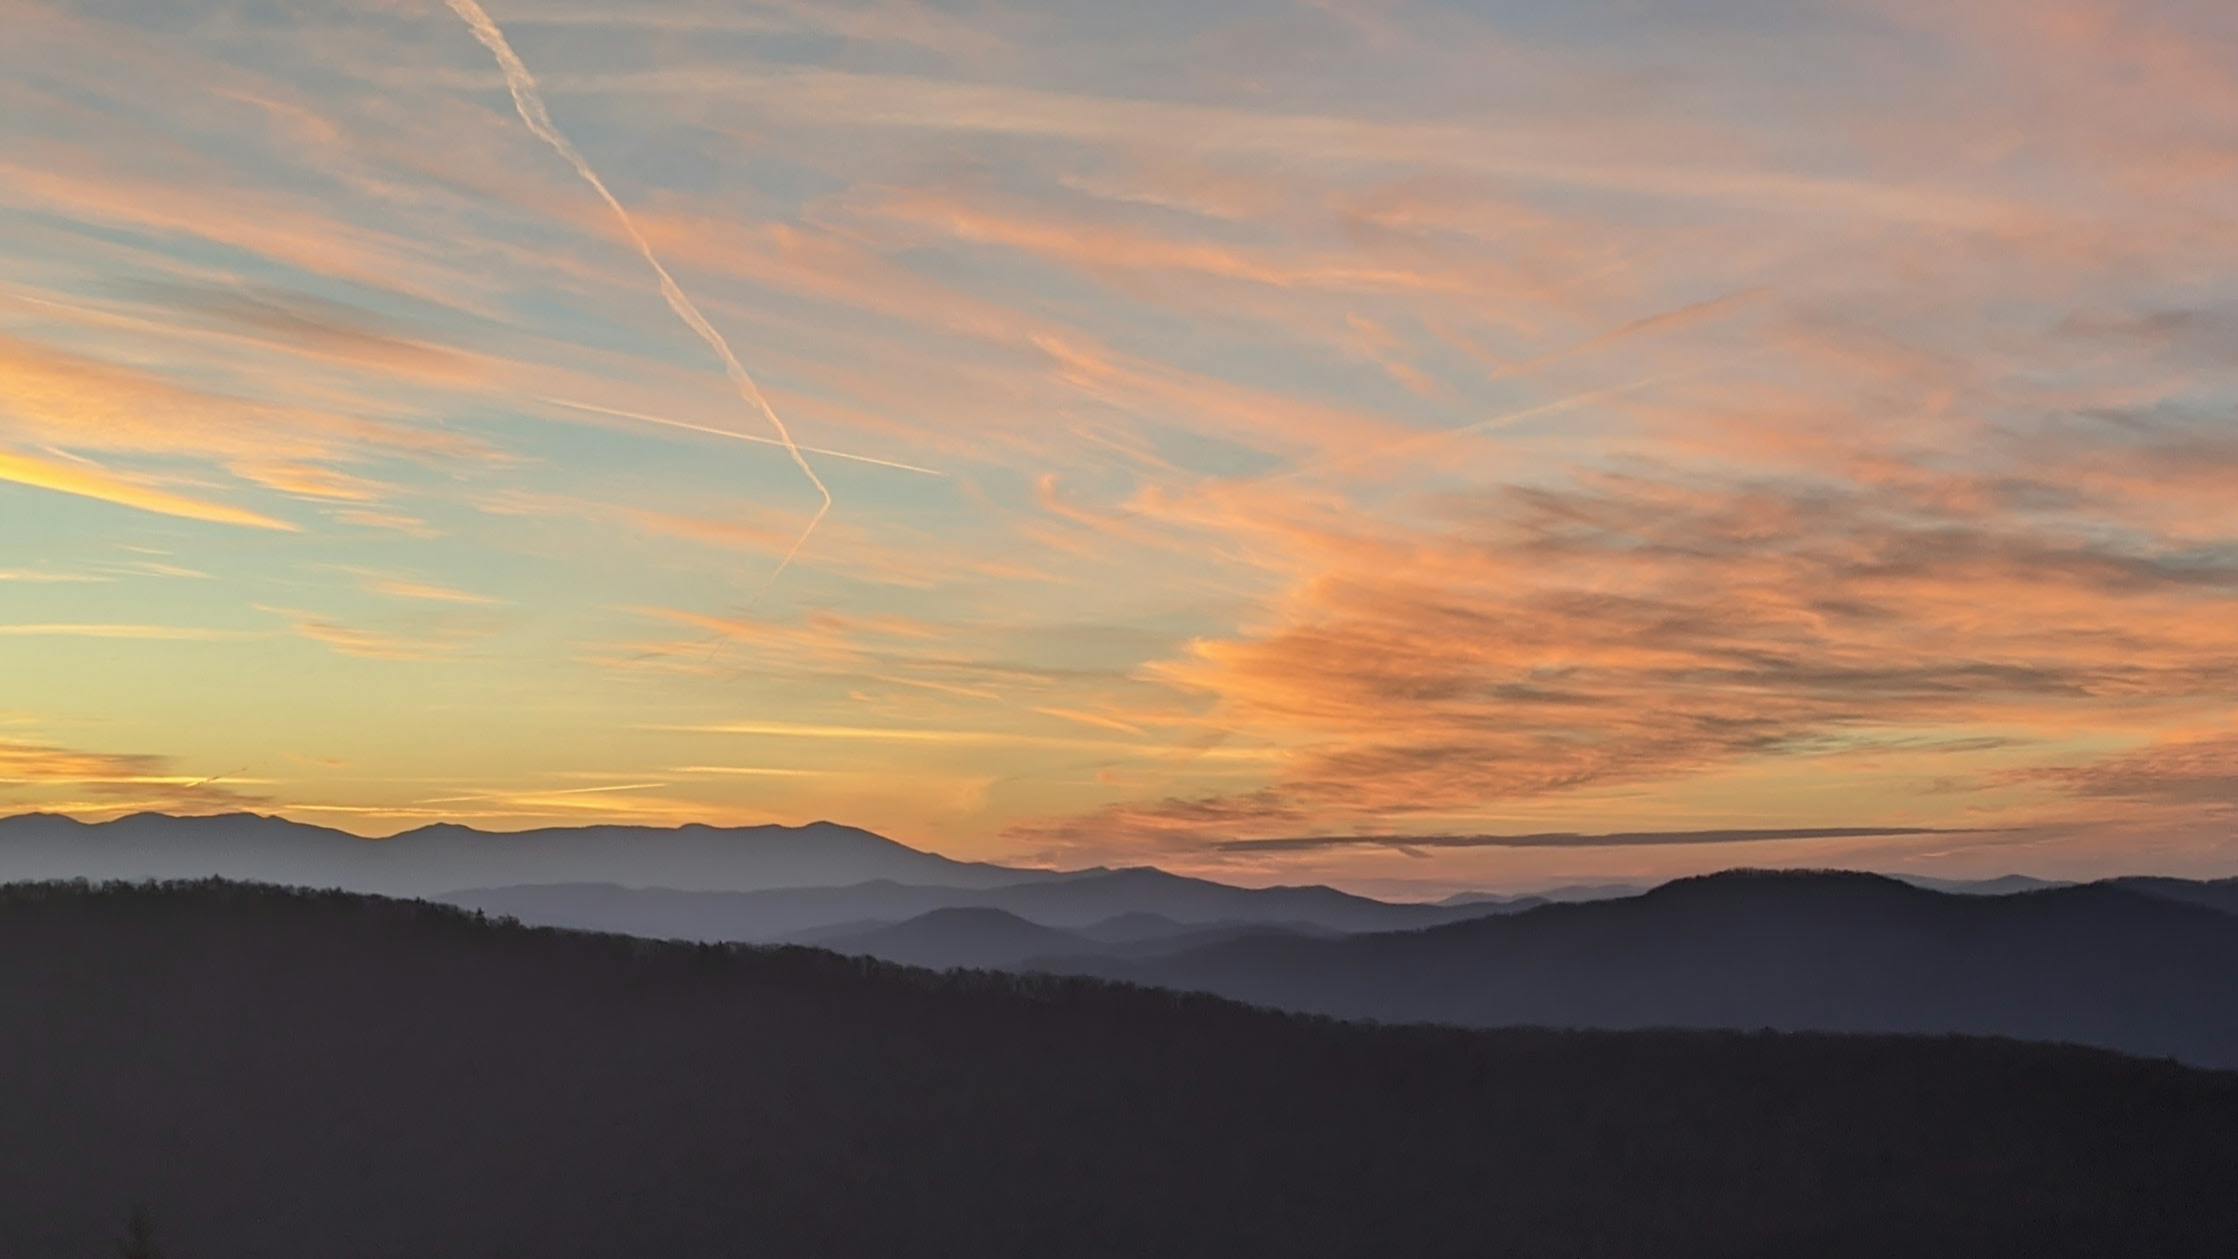 A “typical” Western North Carolina sunset from the Chimneys in Linville Gorge